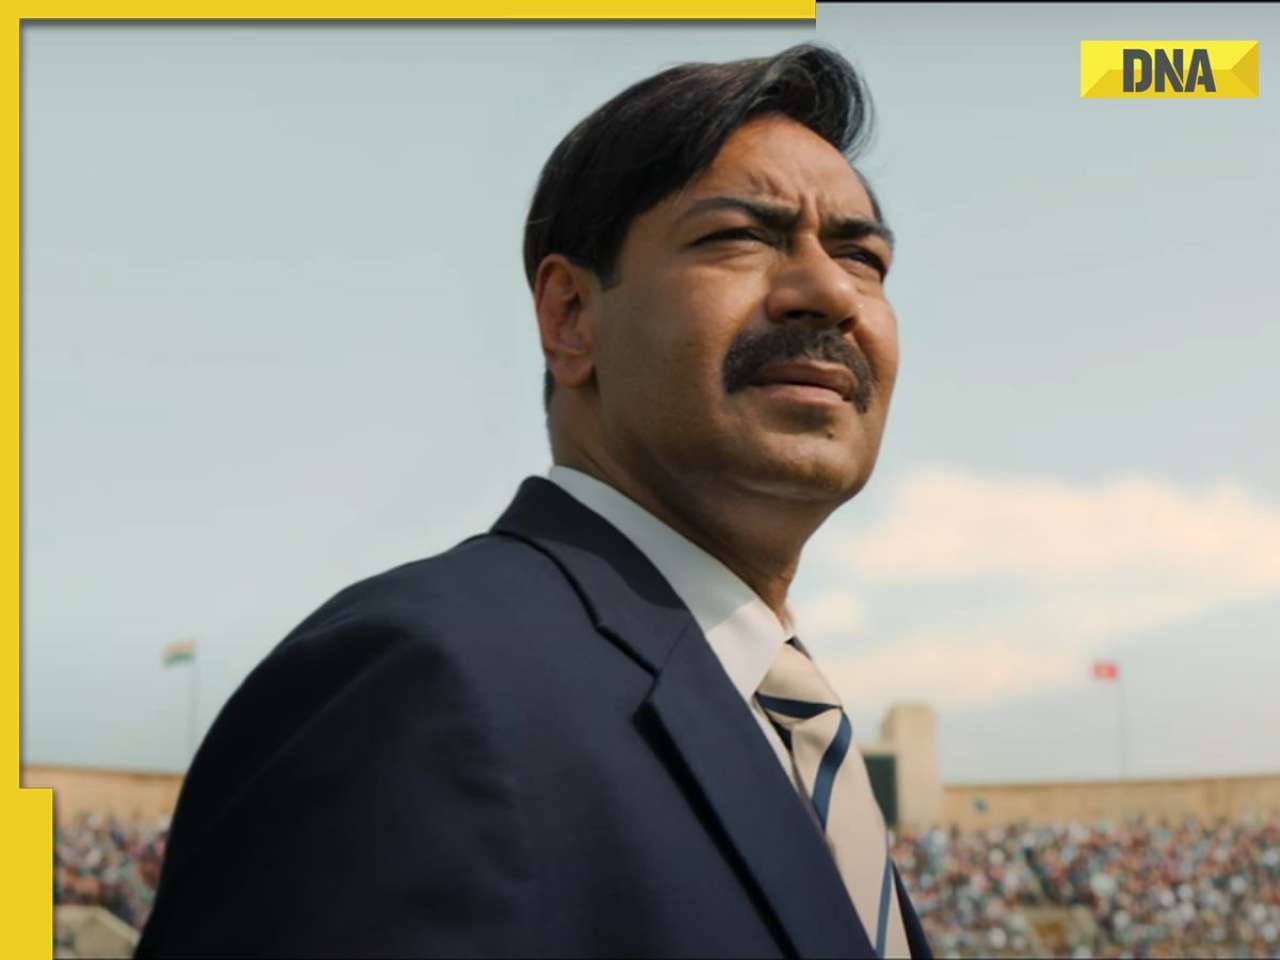 Maidaan trailer: Coach Ajay Devgn takes India into 'golden era of football' with his team of underdogs